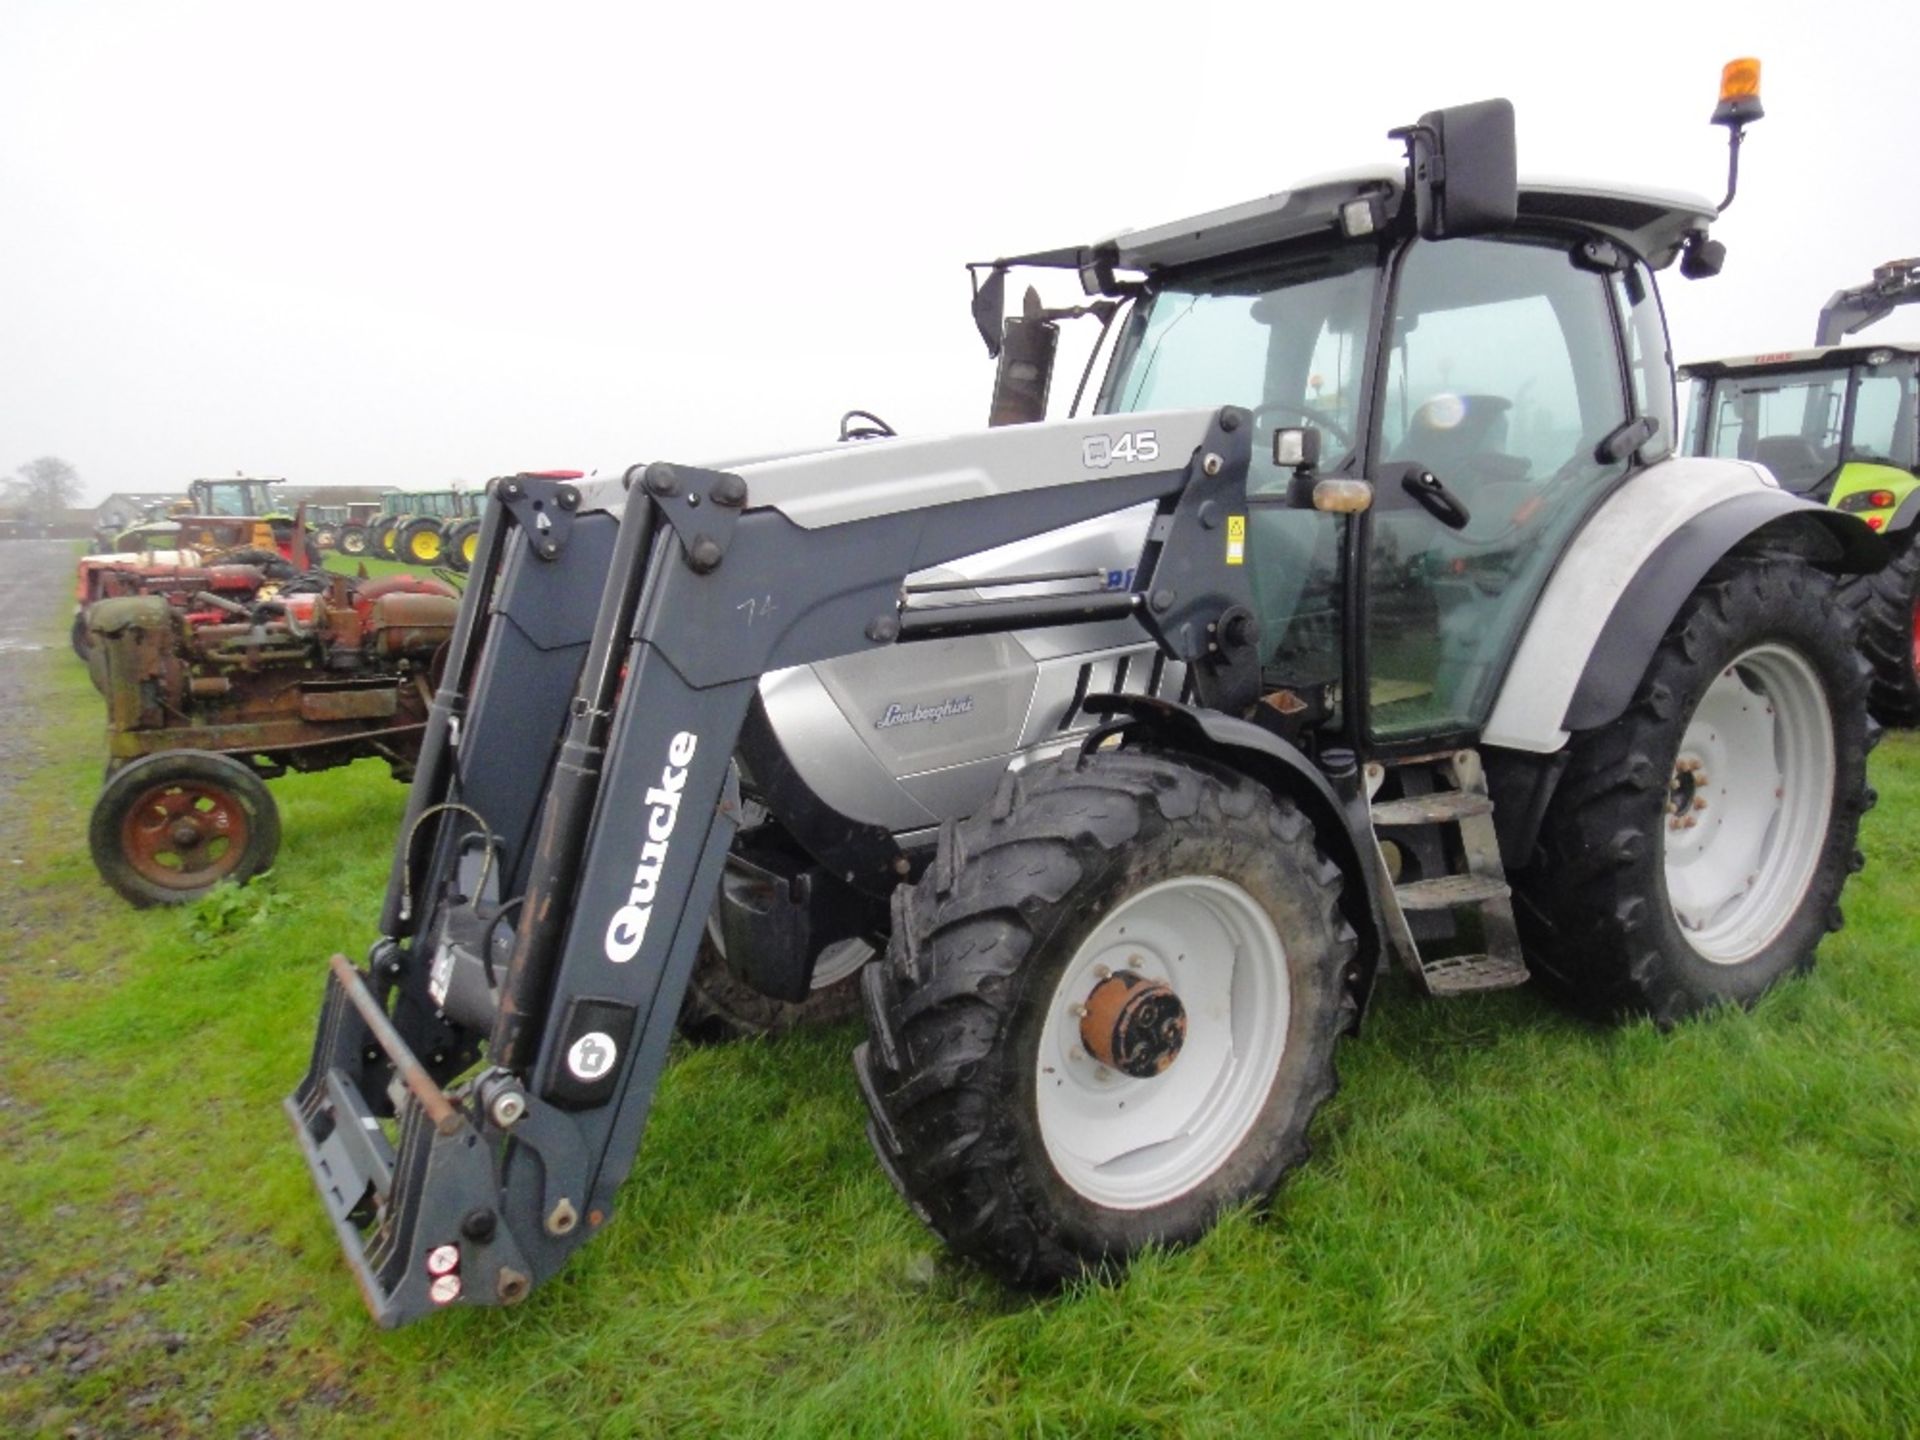 2007 Lamborghini R6120 4wd Tractor with Quickie Q45 Loader. V5 will be supplied